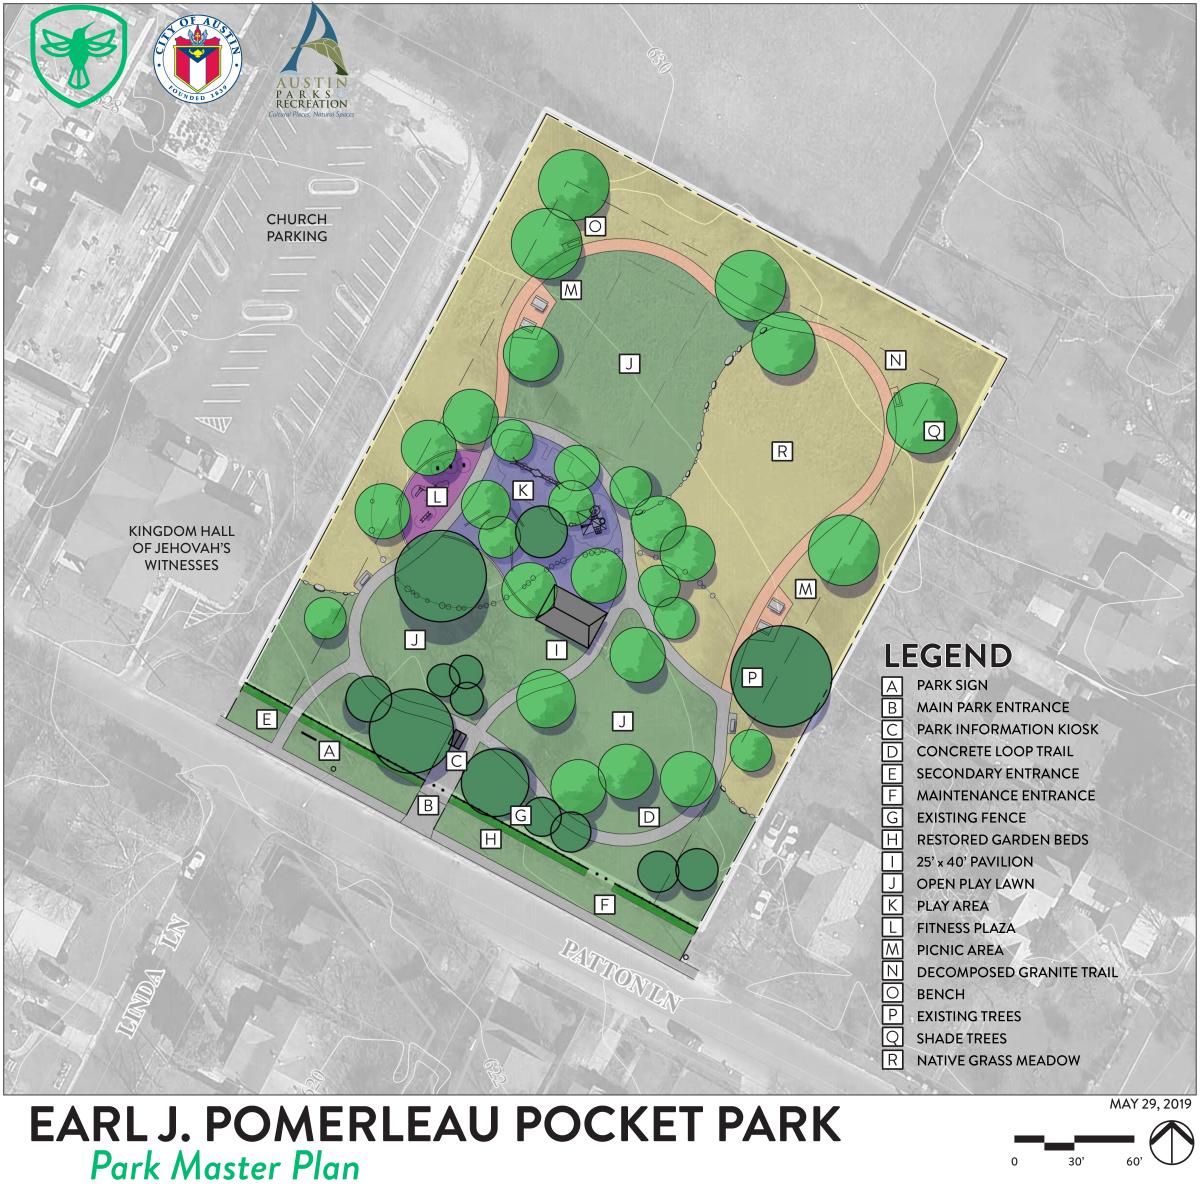 Pomerleau Park Master Plan: Placed to serve as the hub of the park, the pavilion is centered in the middle of the site for ease of access and safety. The layout combines both maintaned turf for flexible open space uses and the establishment of a native meadow for a portion of the site. There are many options for exploration through a meandering loop trail layout and connection walks while serving the neighborhood with many options for seating, gathering, exercise and play.